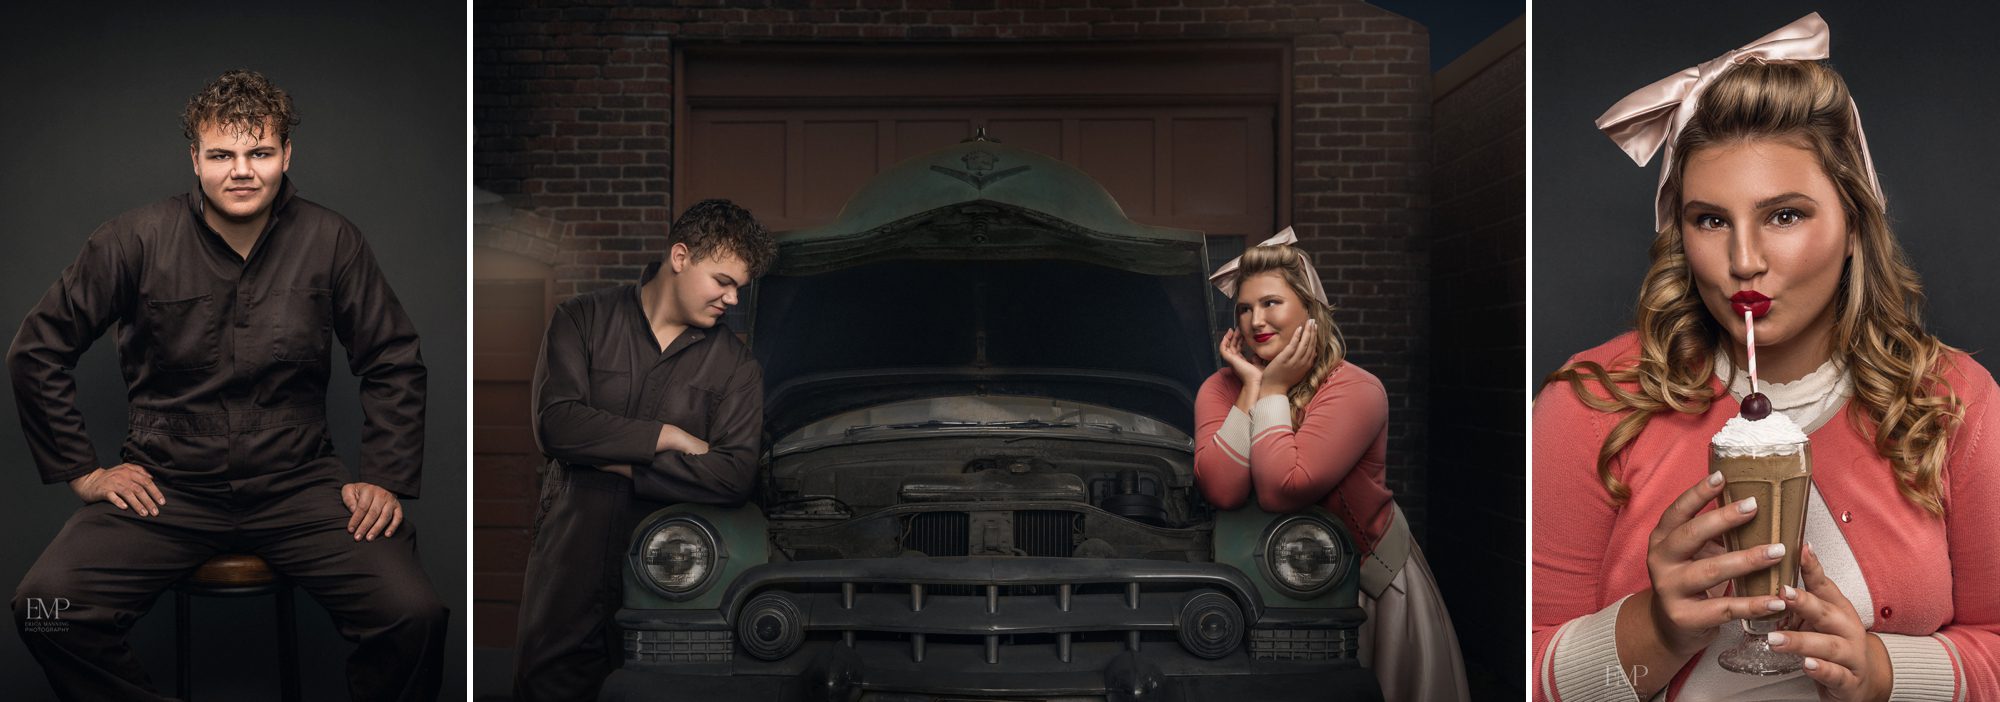 Fifties scene with girl and boy with vintage car